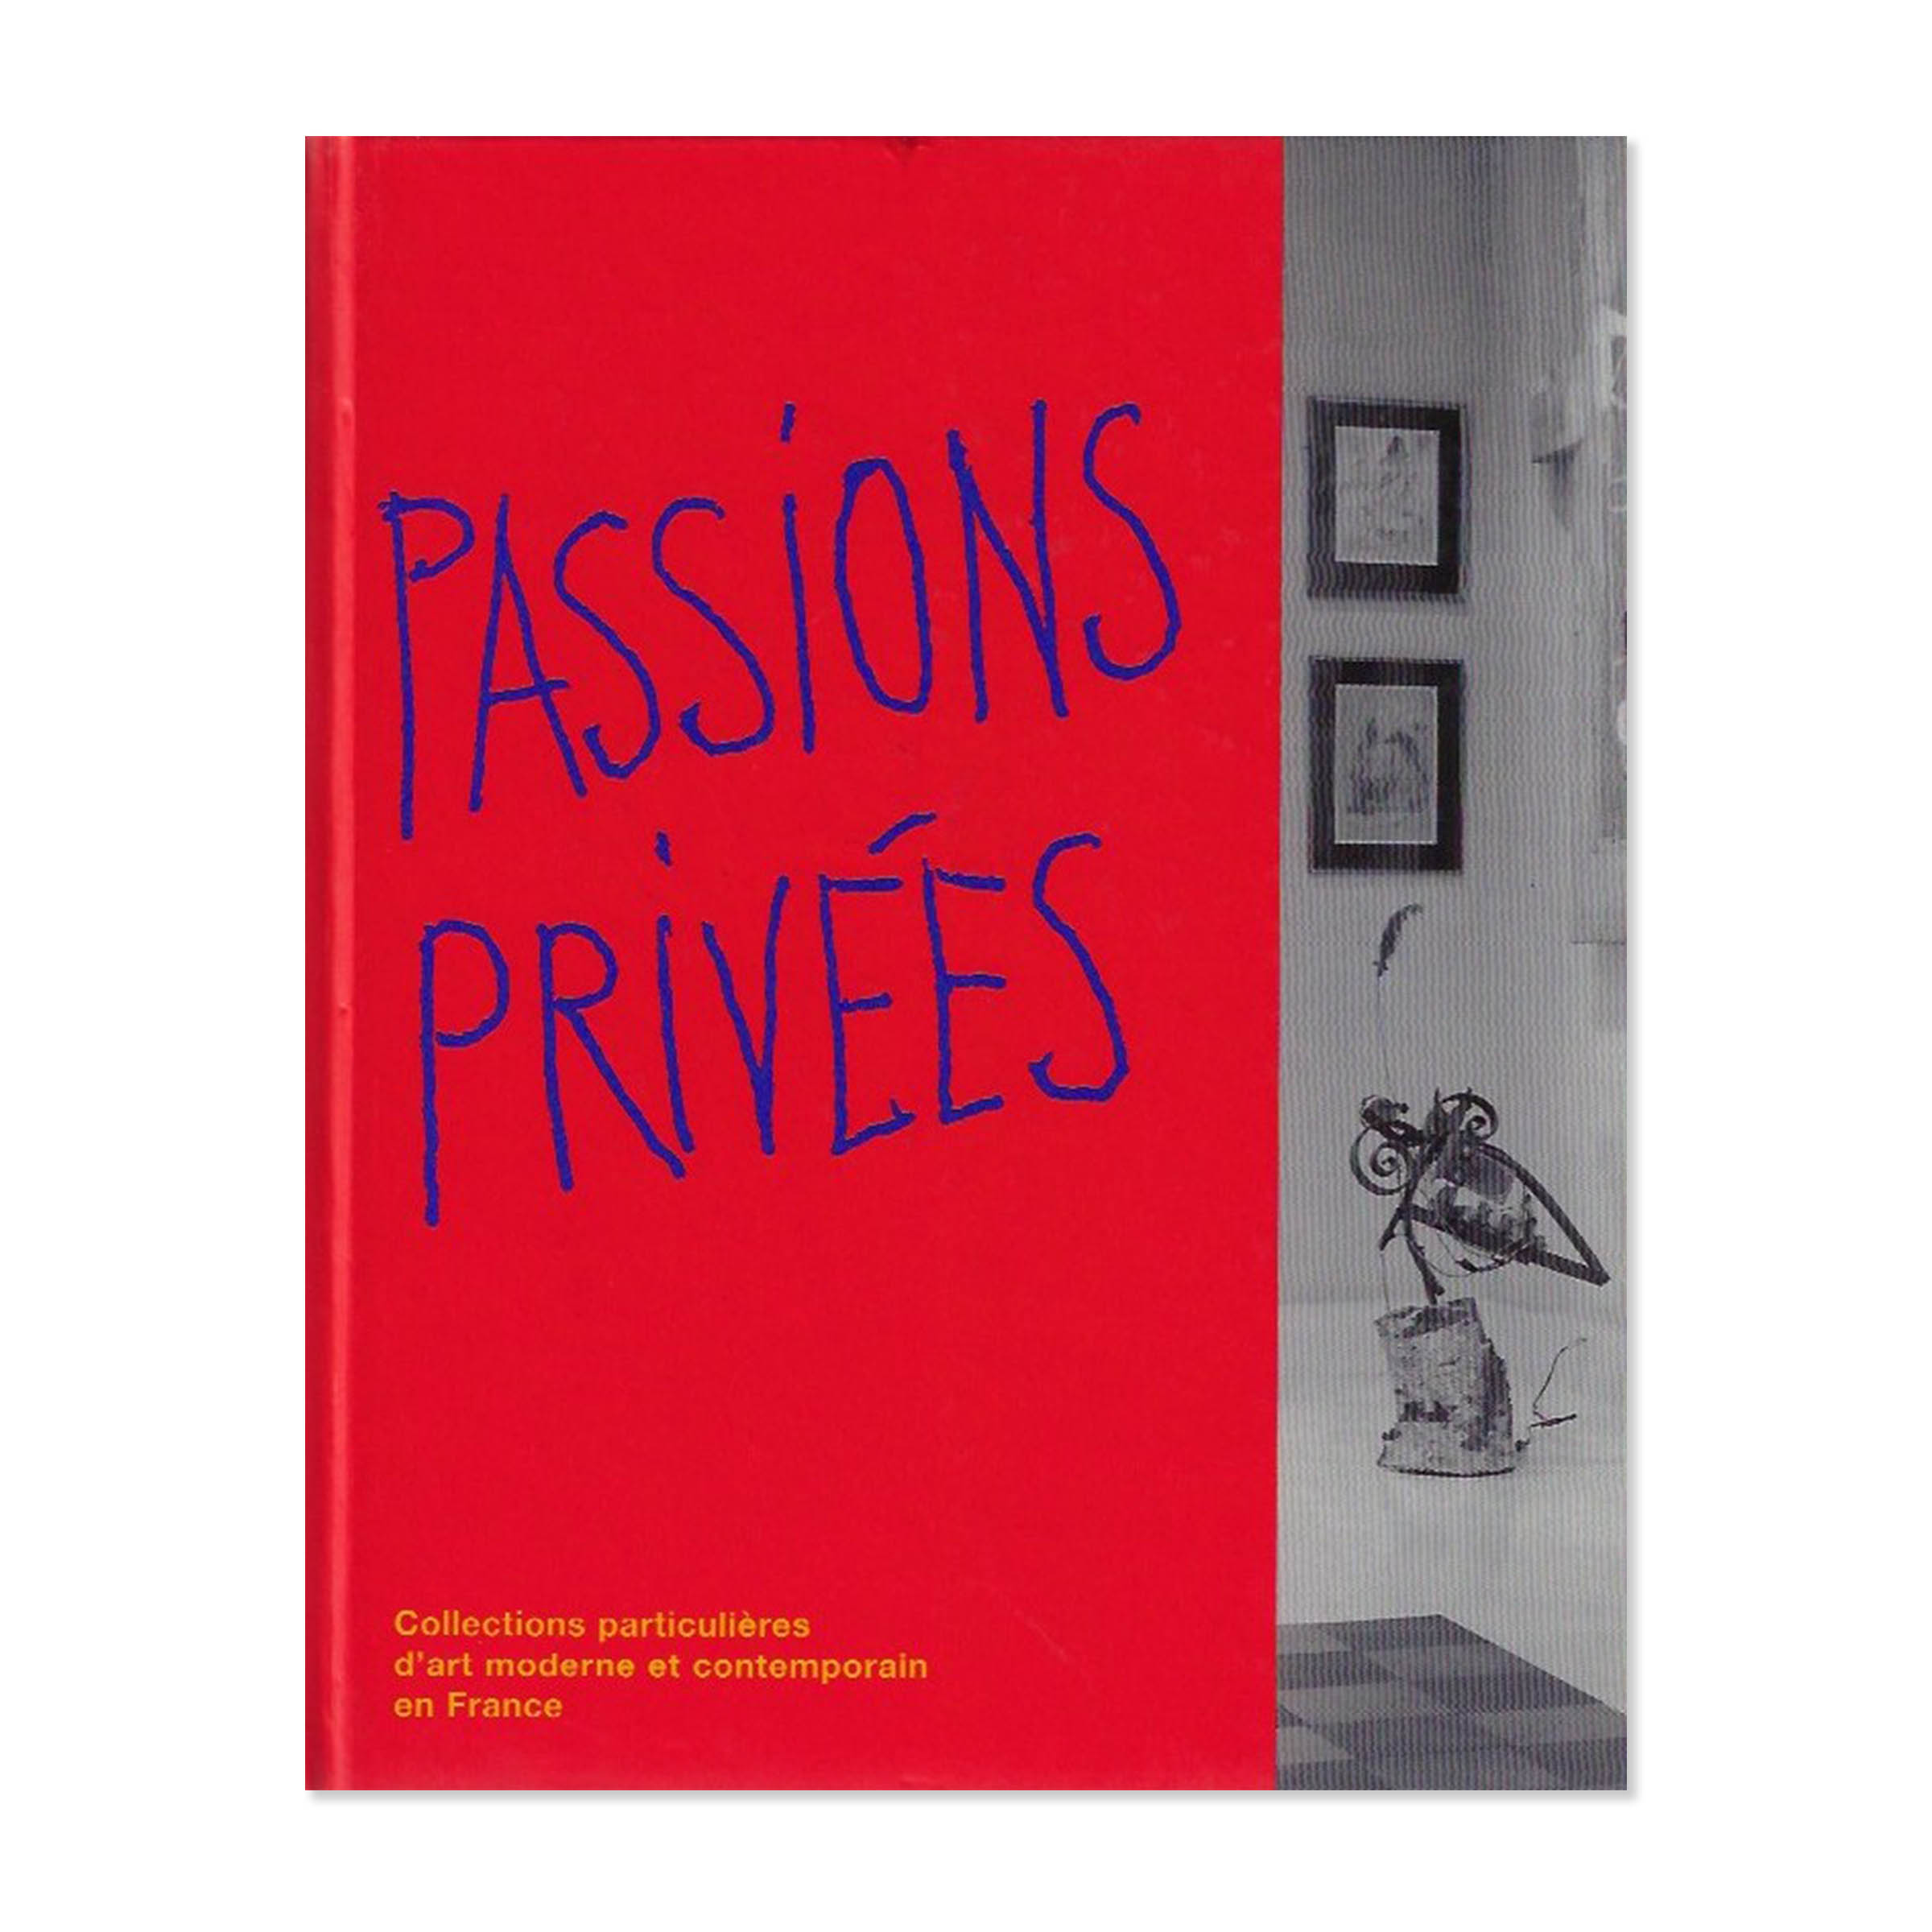 Passions privées. Cover view